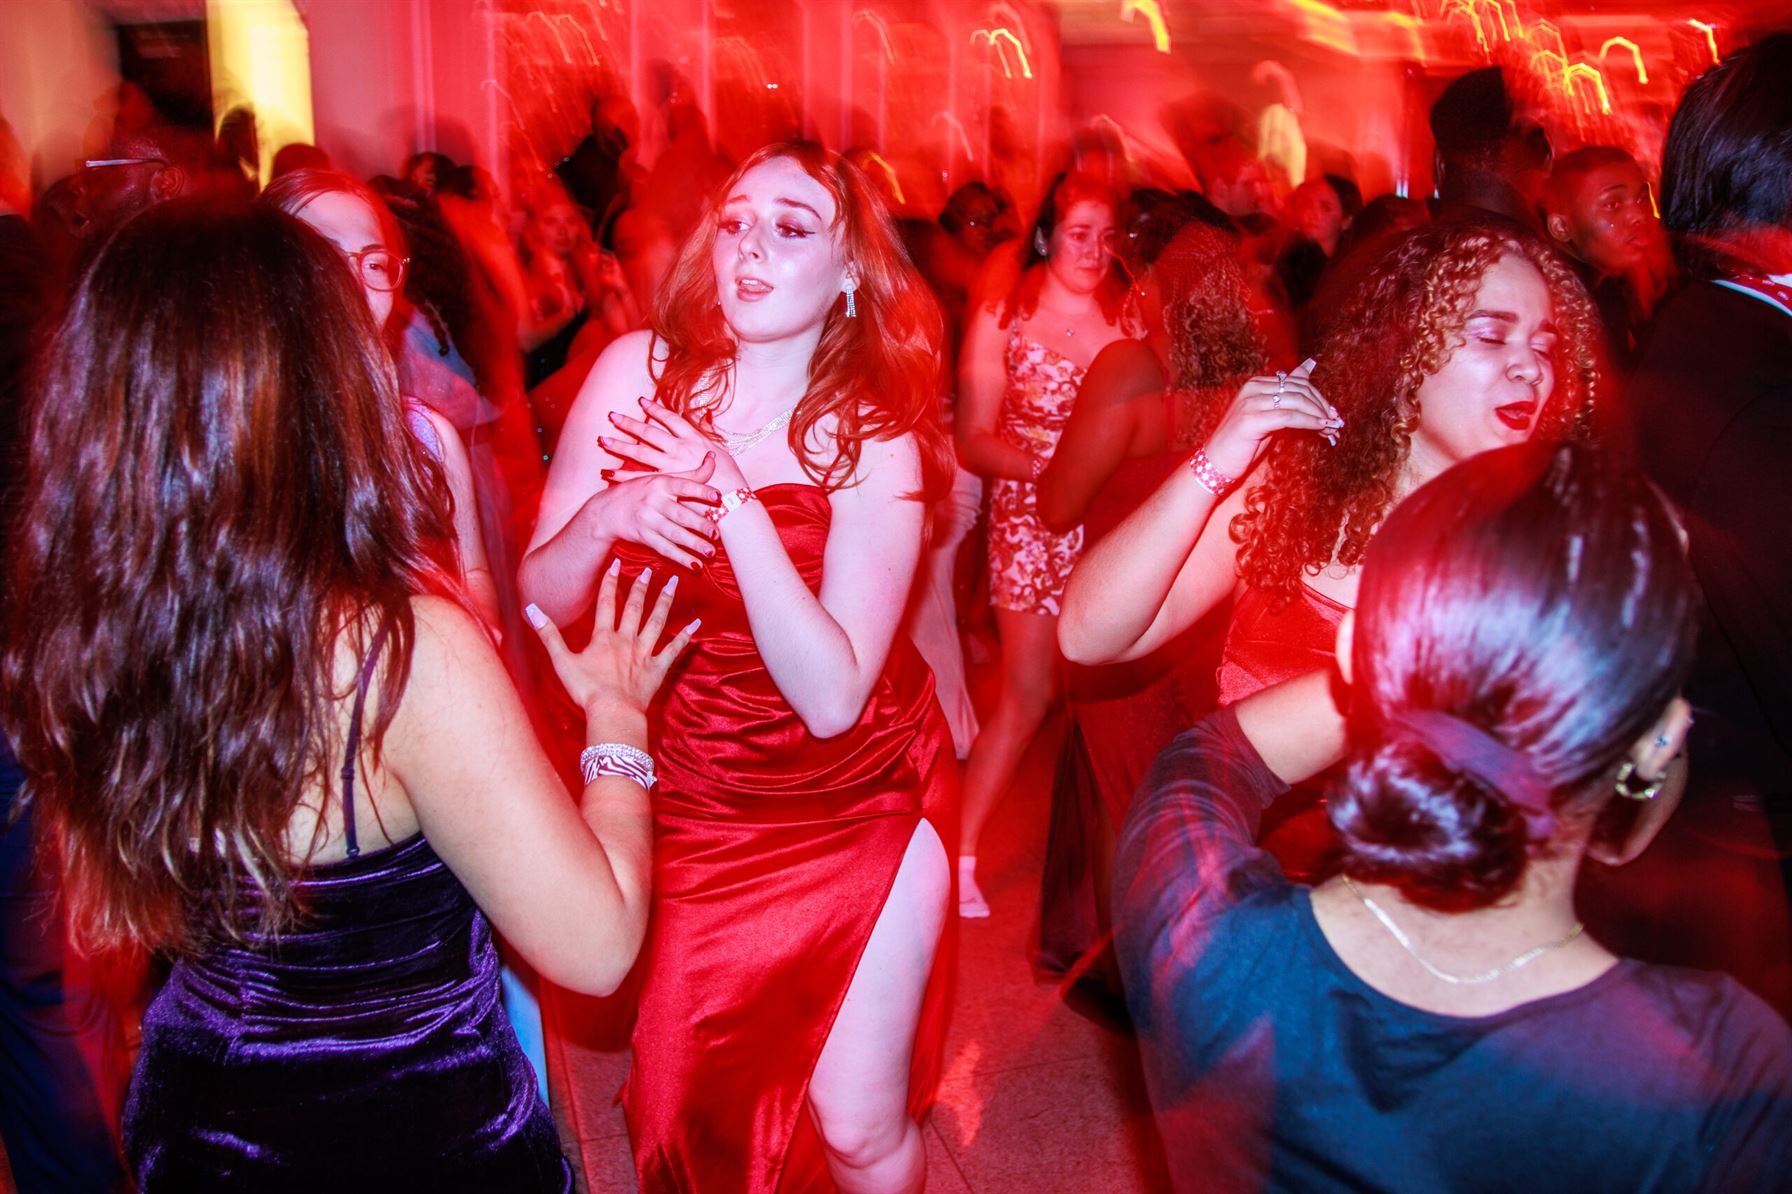 Students dance together during SLAM's Winter Gala at The Royal Manor in Garfield, N.J. Sal DiMaggio | The Montclarion